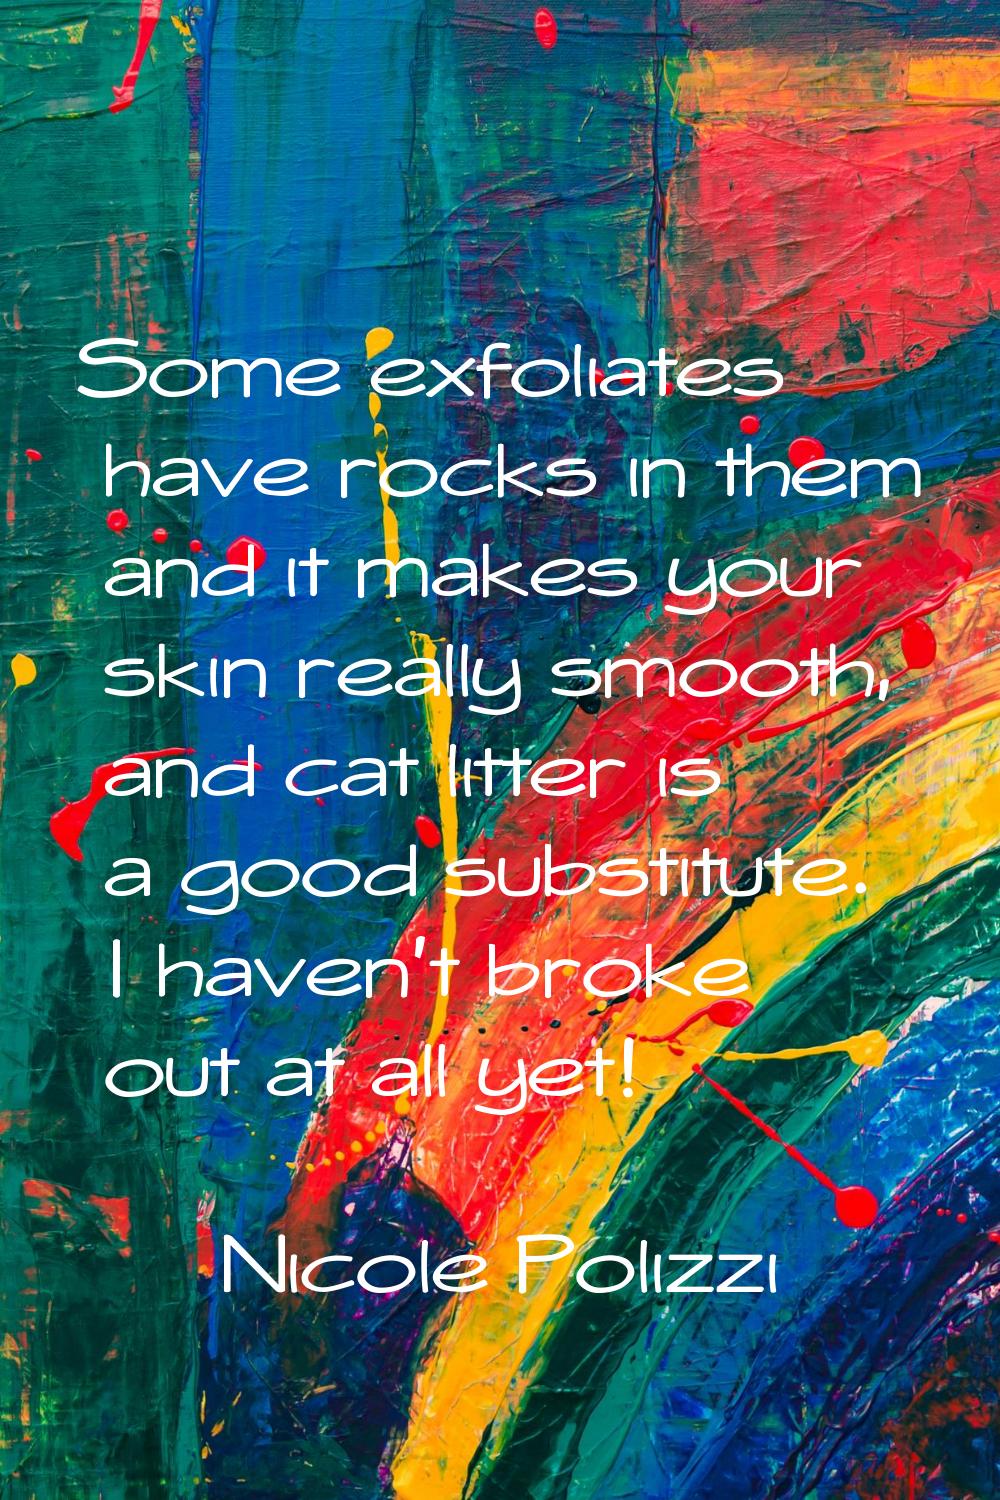 Some exfoliates have rocks in them and it makes your skin really smooth, and cat litter is a good s